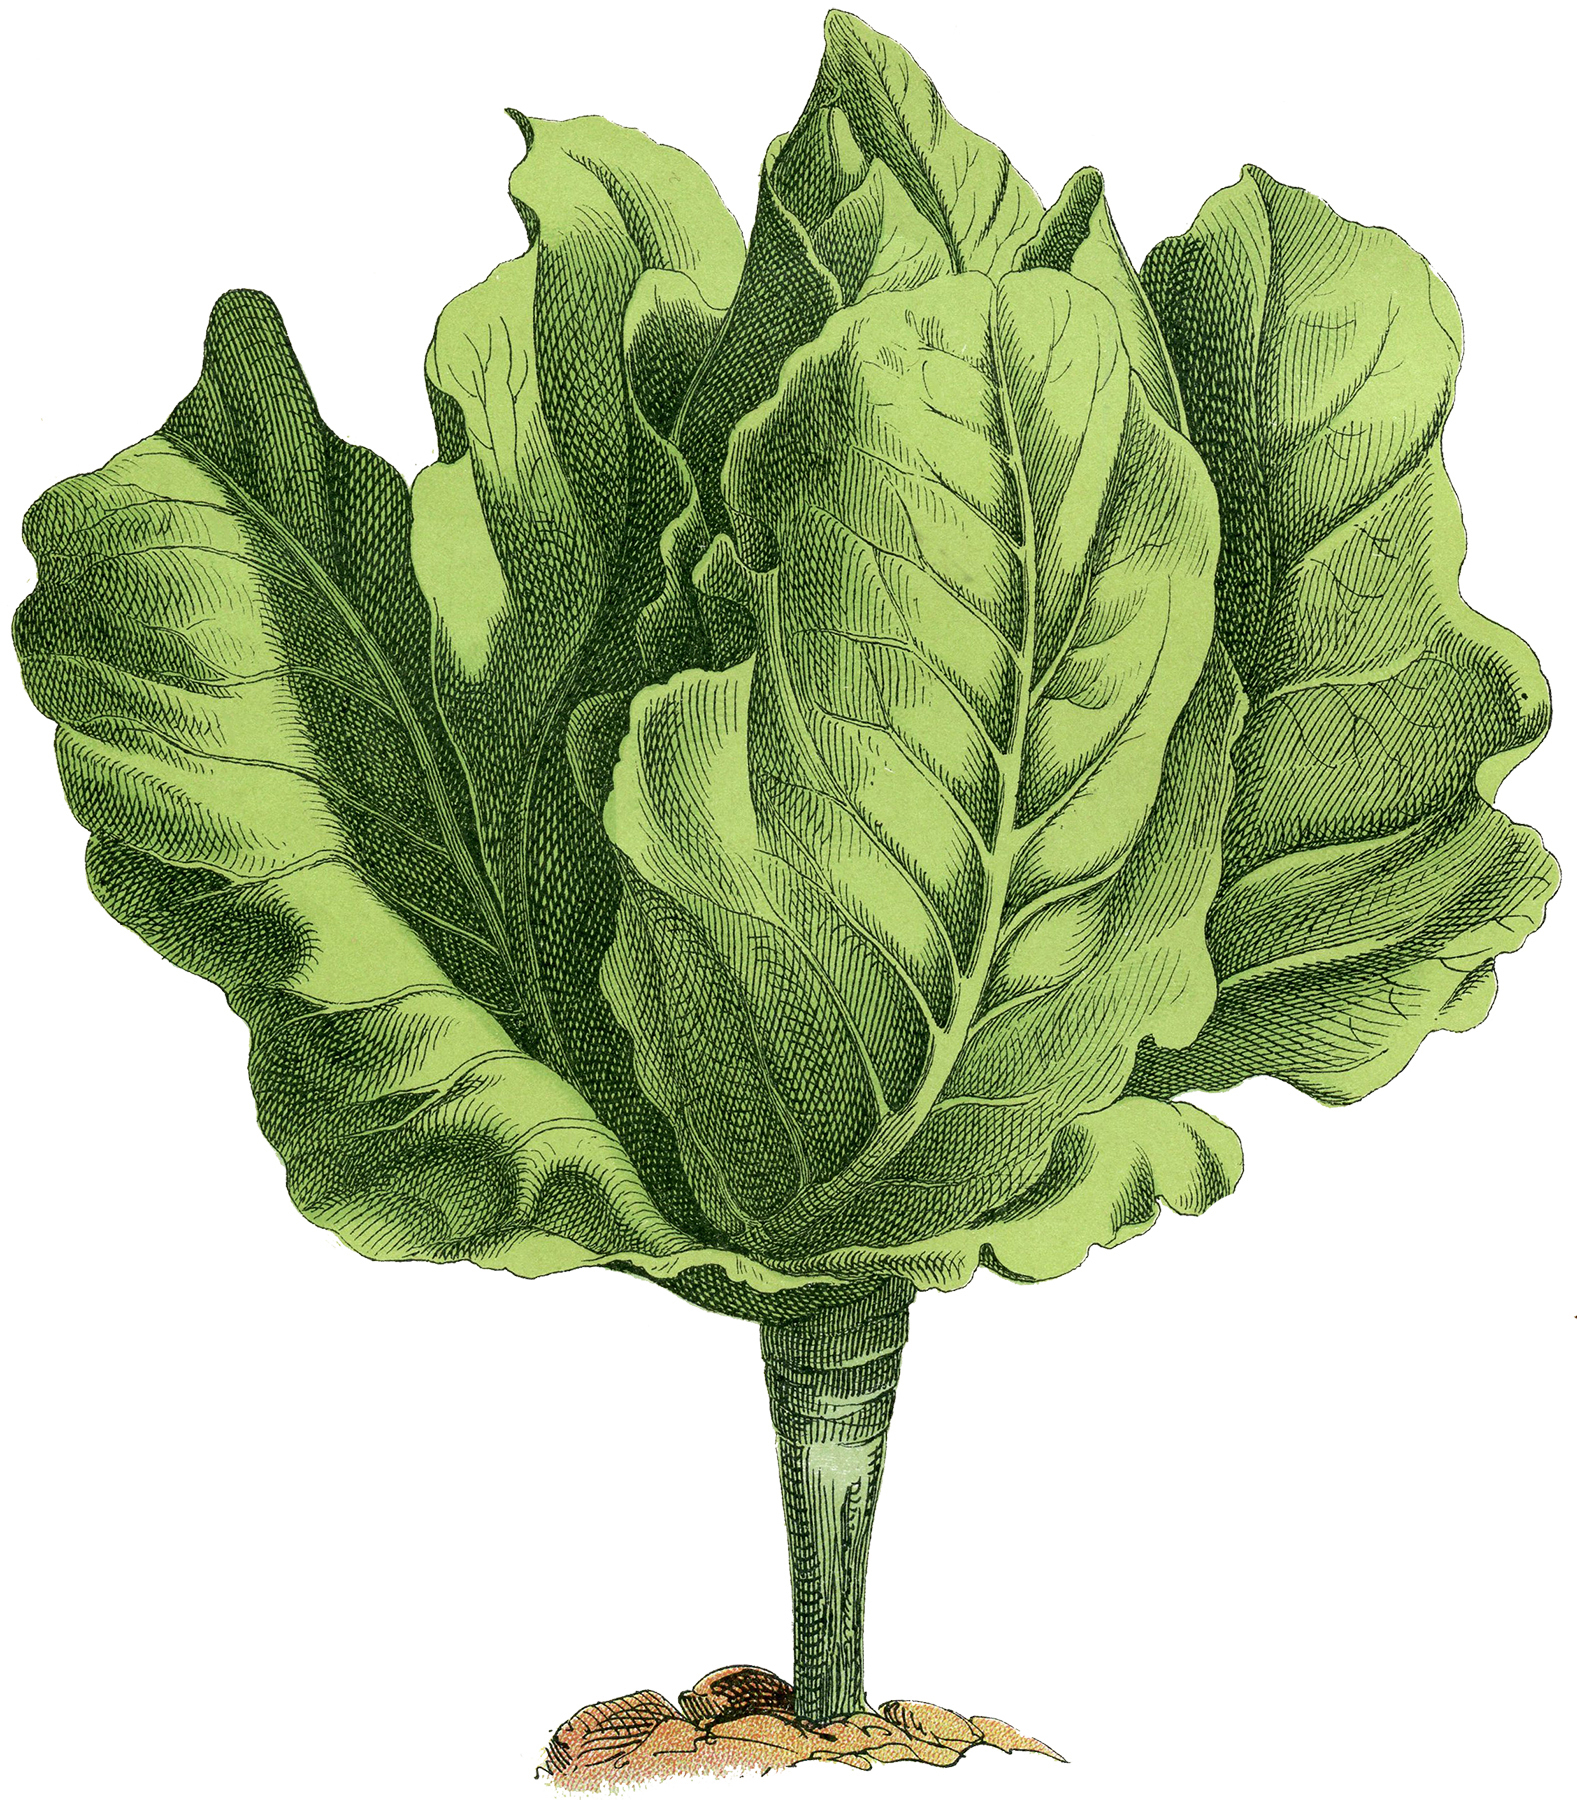 Stock Lettuce Image - Fresh and Lovely! - The Graphics Fairy